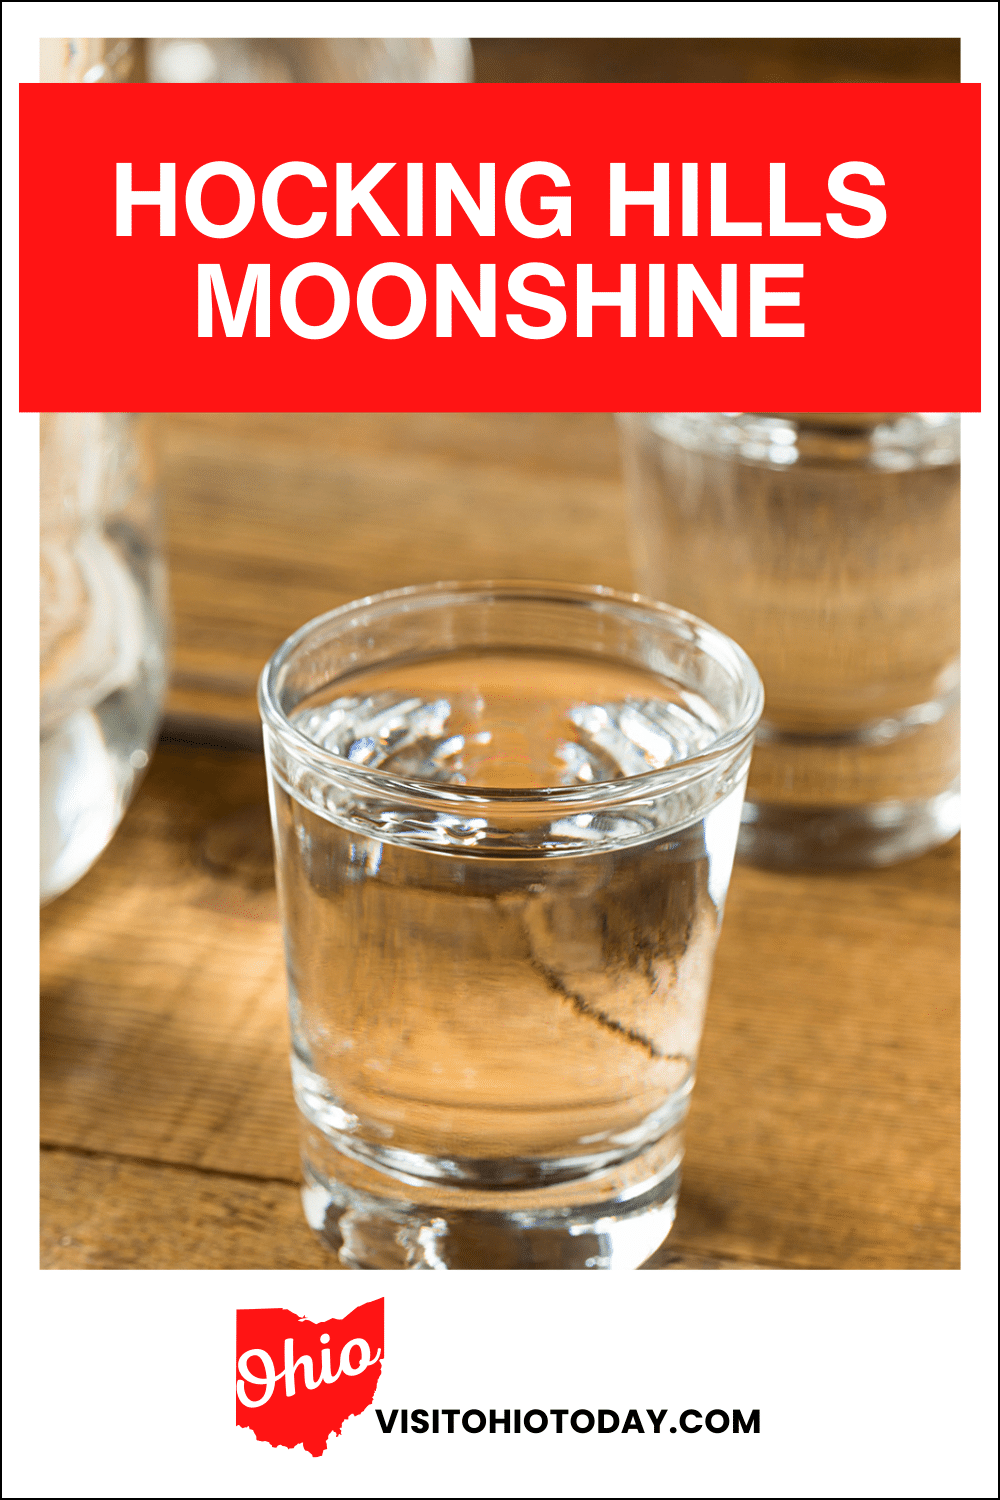 vertical image with a photo of a shot glass of Moonshine on a wooden surface. A red box across the top has the text Hocking Hills Moonshine